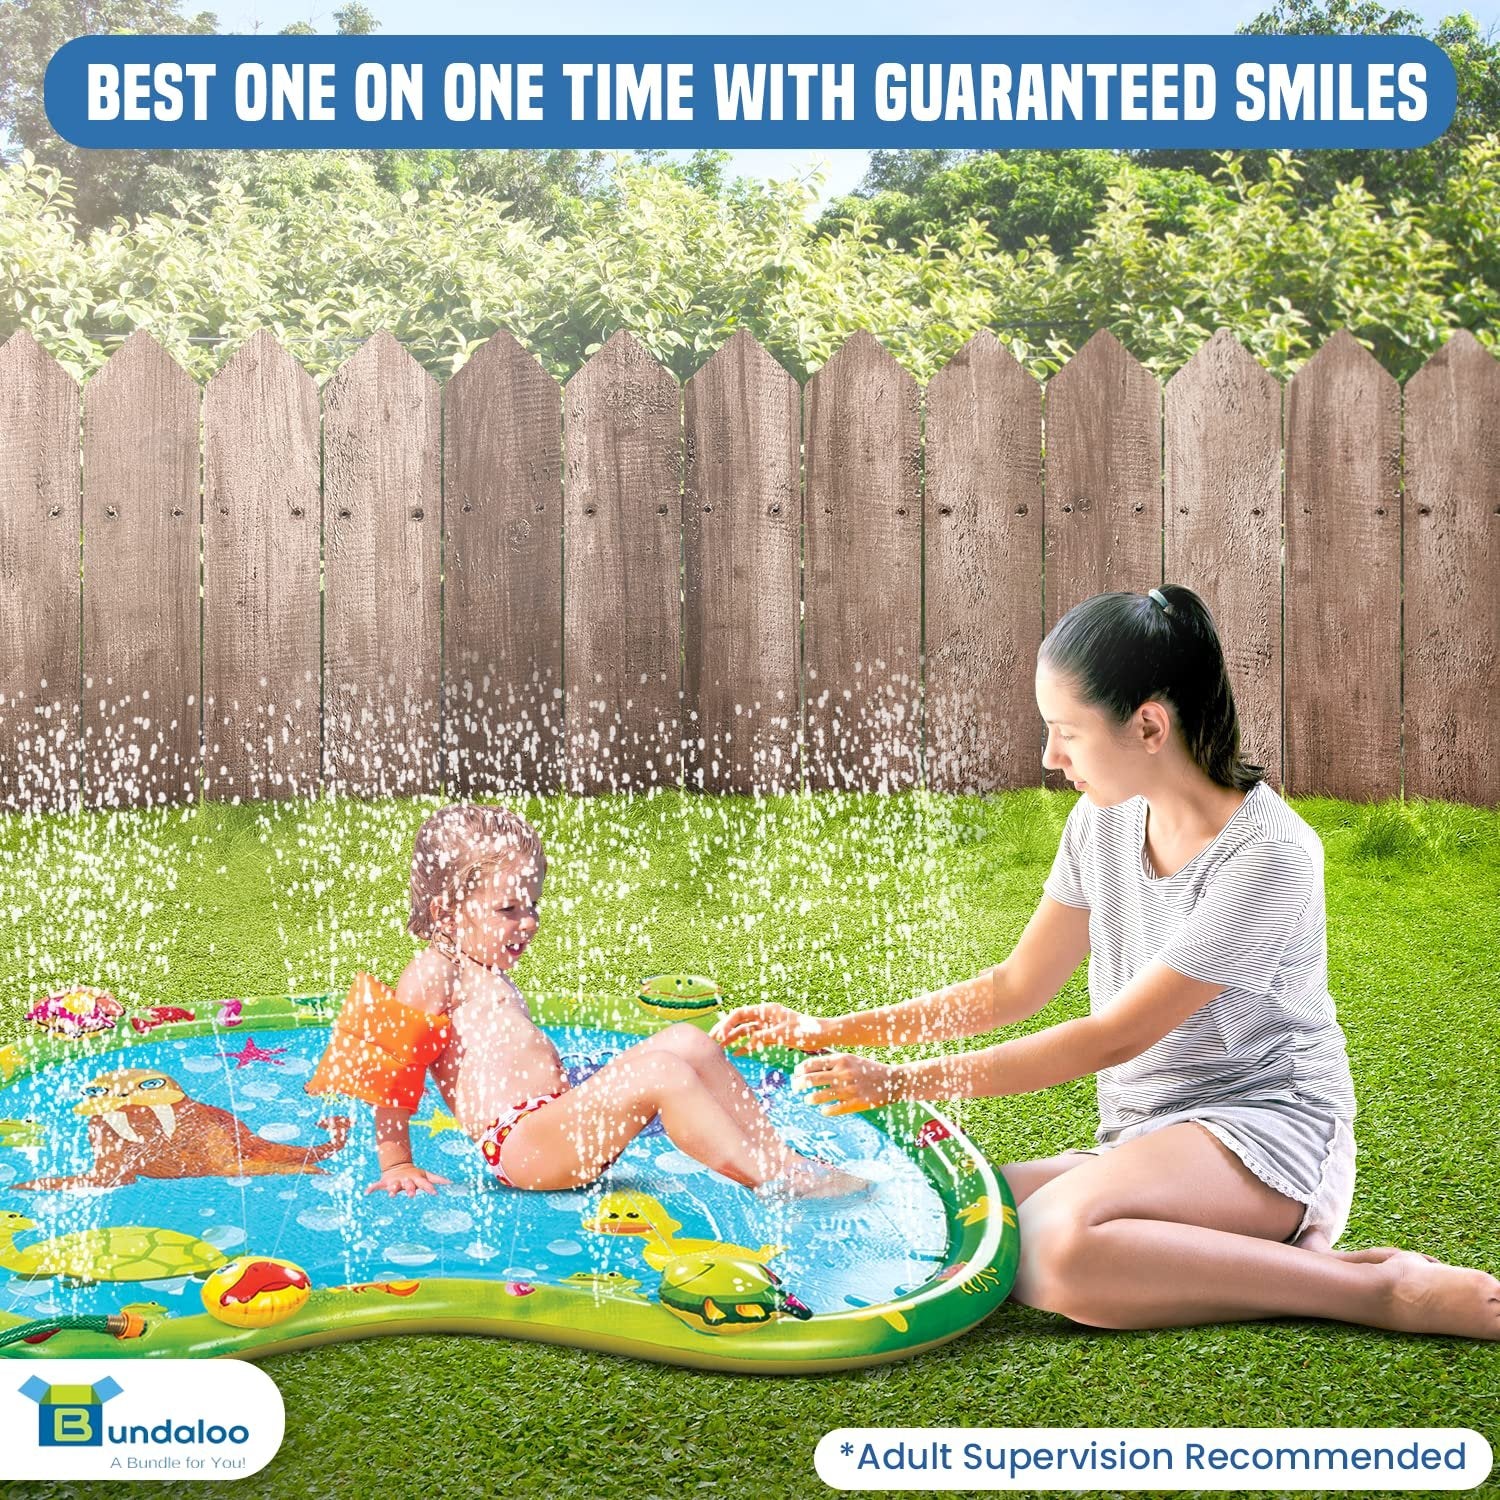 Inflatable Baby Splash Pad with Sprinklers for Outdoor Summer Fun - Blue/Green - Free Shipping & Returns